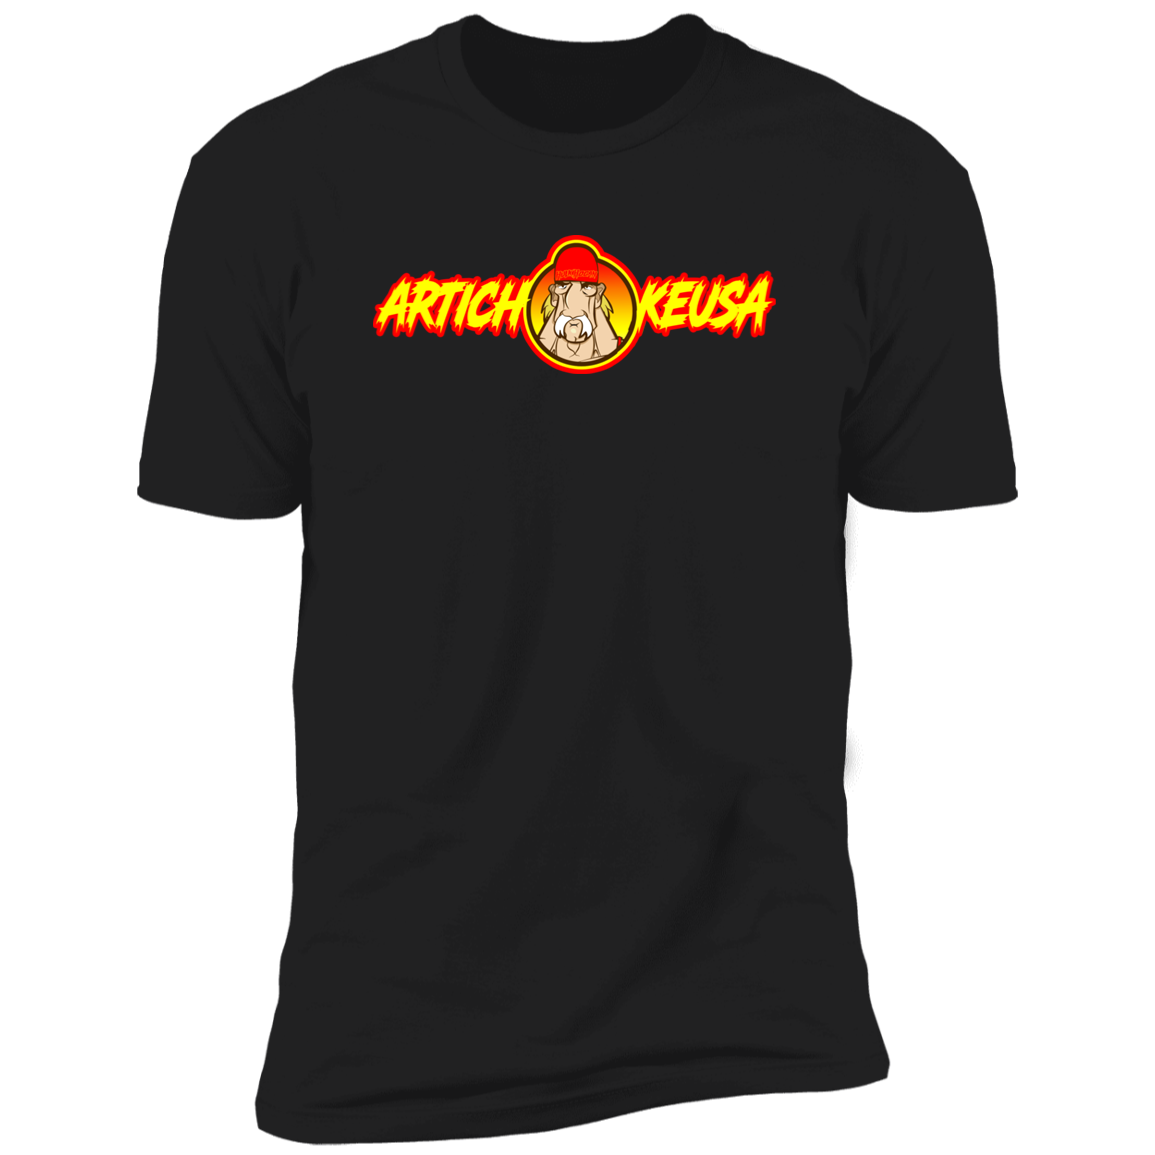 ArtichokeUSA Character and Font Design. Let’s Create Your Own Design Today. Fan Art. The Hulkster. Men's Premium Short Sleeve T-Shirt